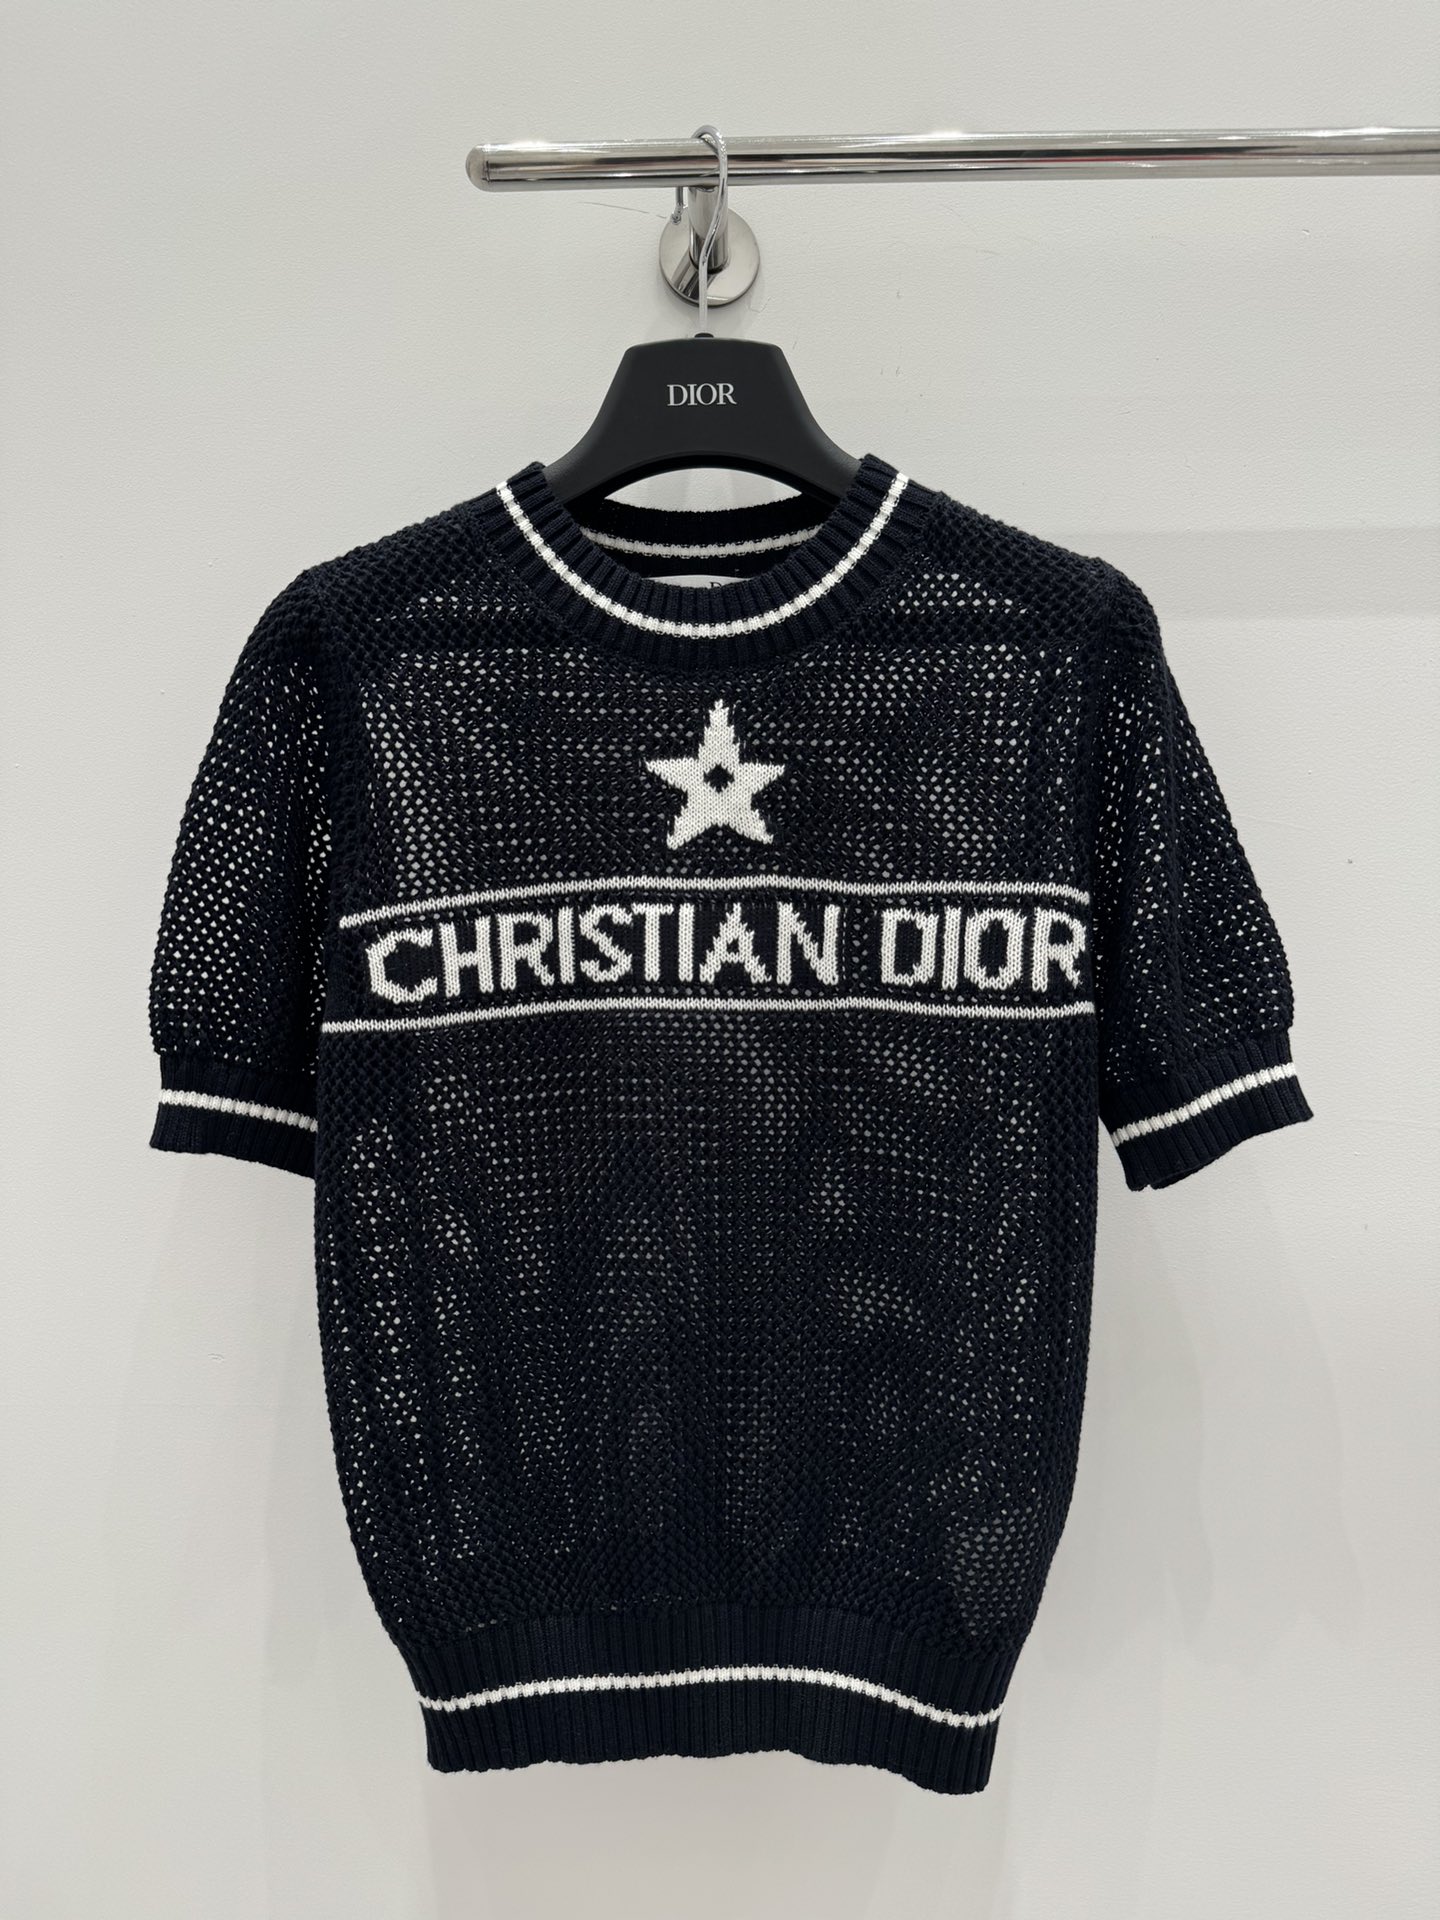 Dior Clothing Knit Sweater Shirts & Blouses Outlet 1:1 Replica
 Black White Openwork Knitting Spring/Summer Collection